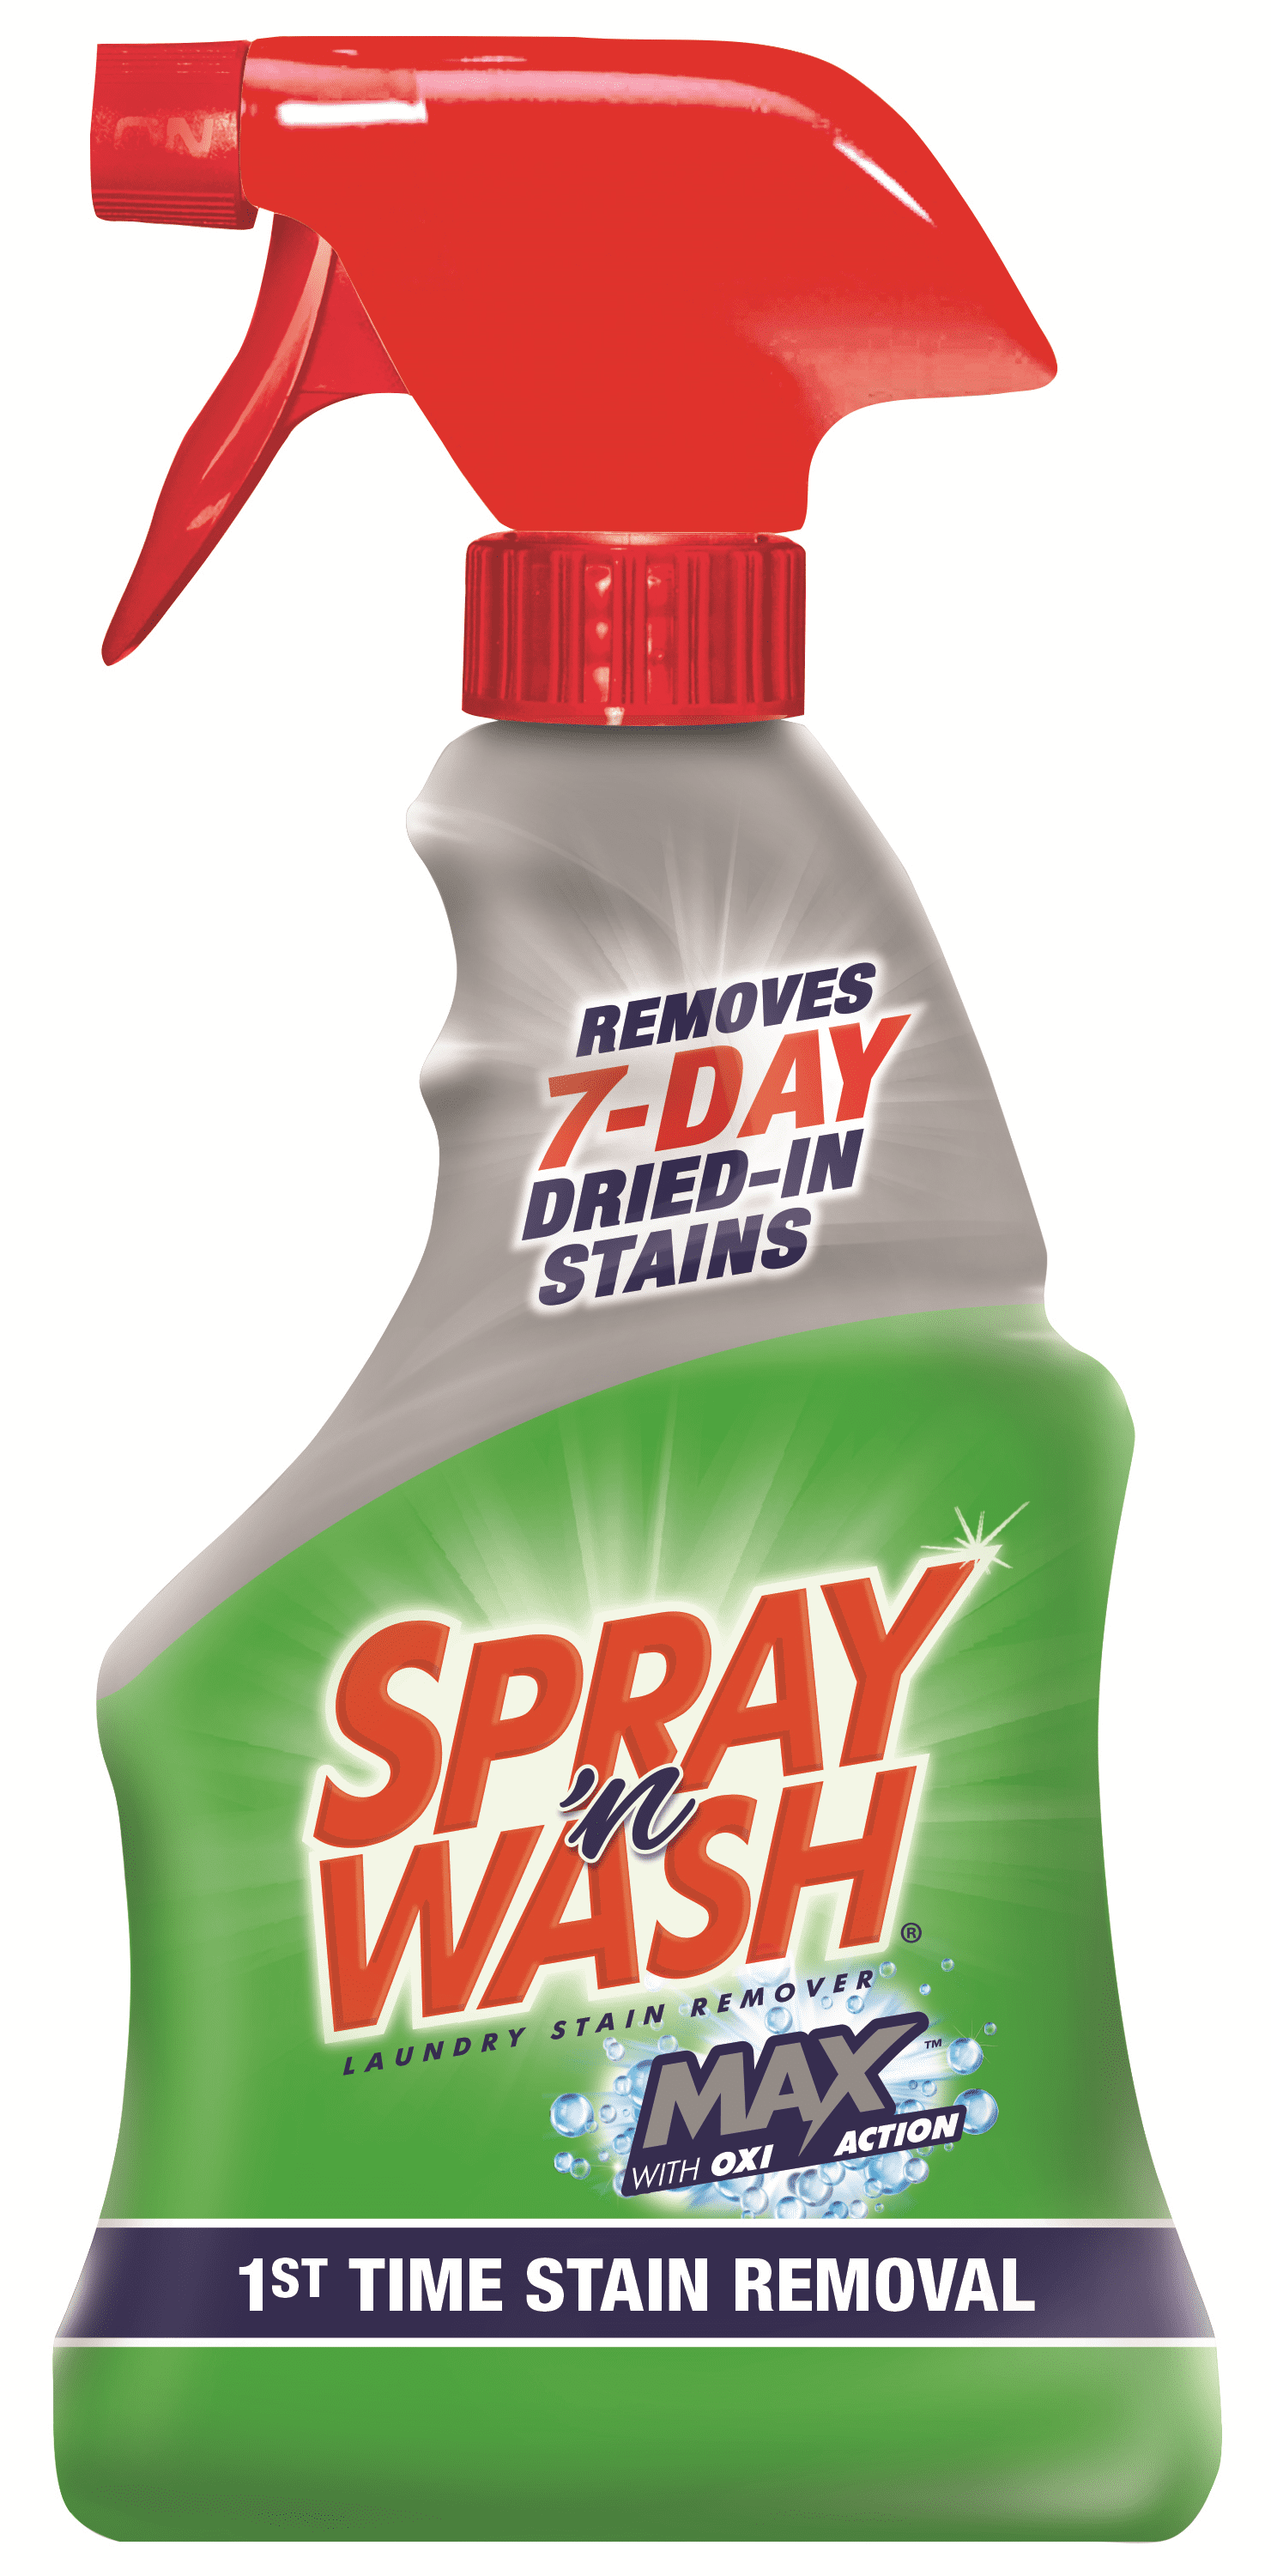  Spray  n Wash Max Laundry  Stain Remover 16oz Bottle 